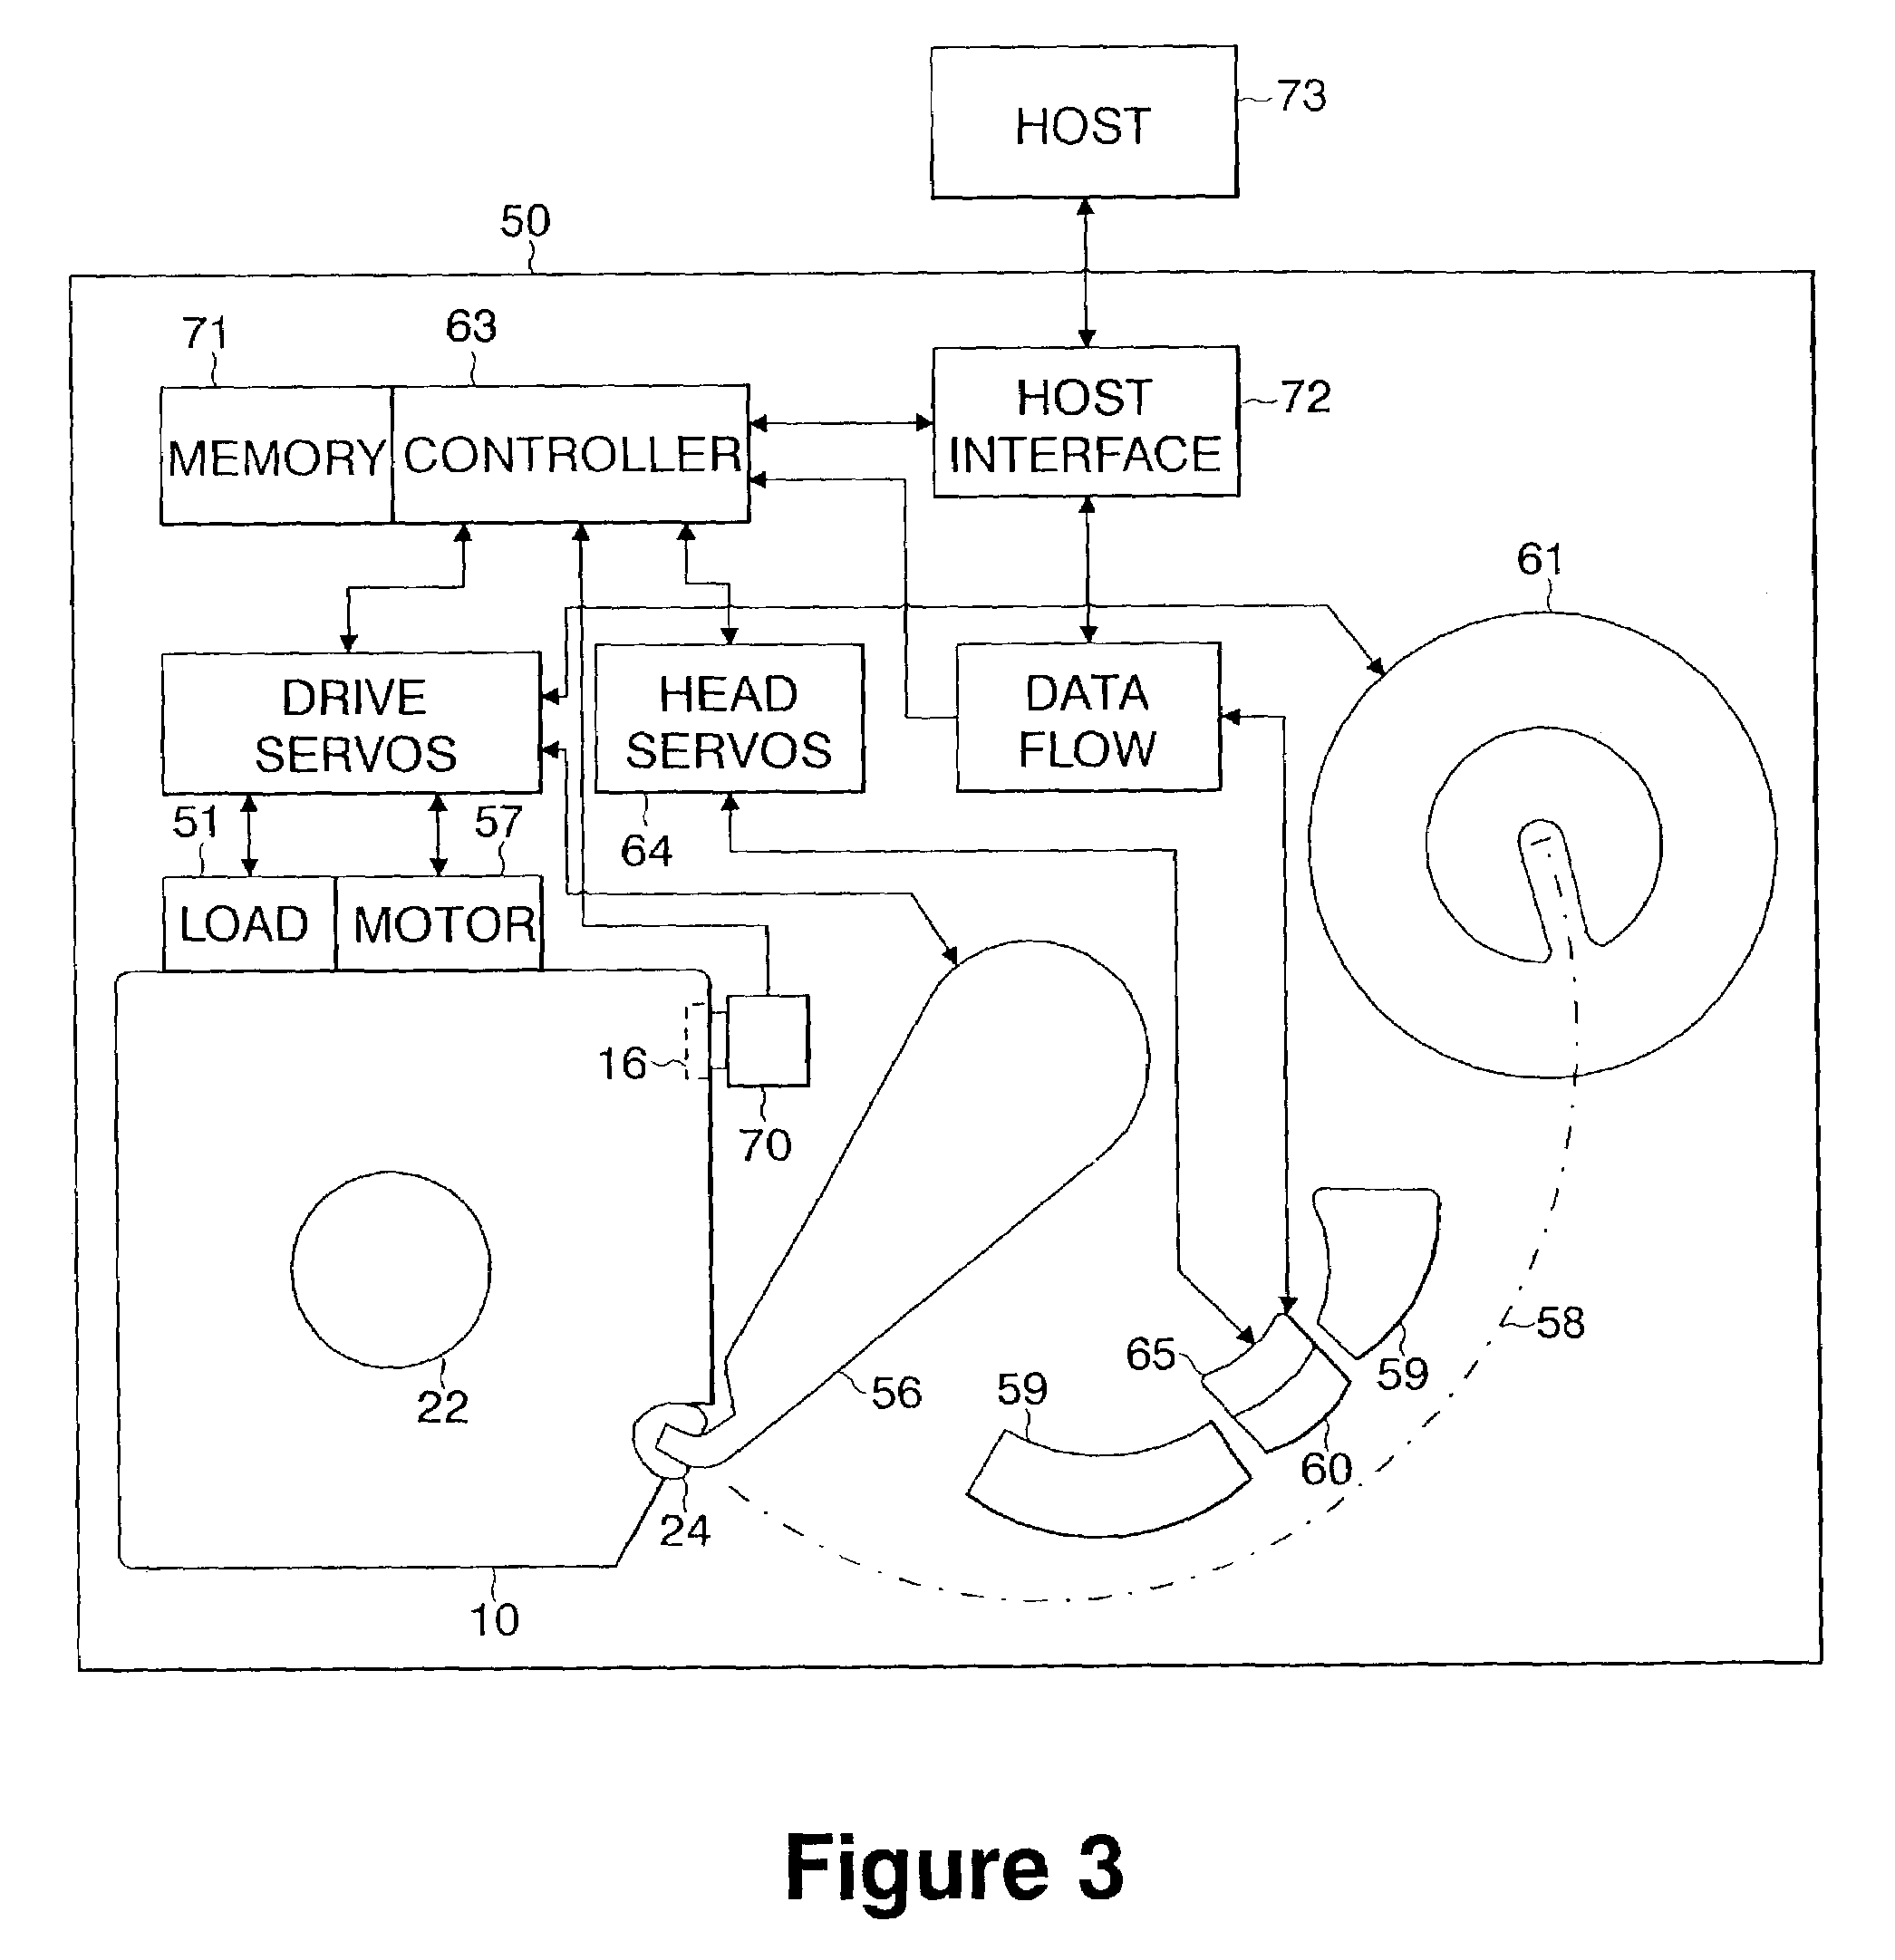 Random access time to data stored on LTO tape by incorporating stacked cartridge memory (CM) modules